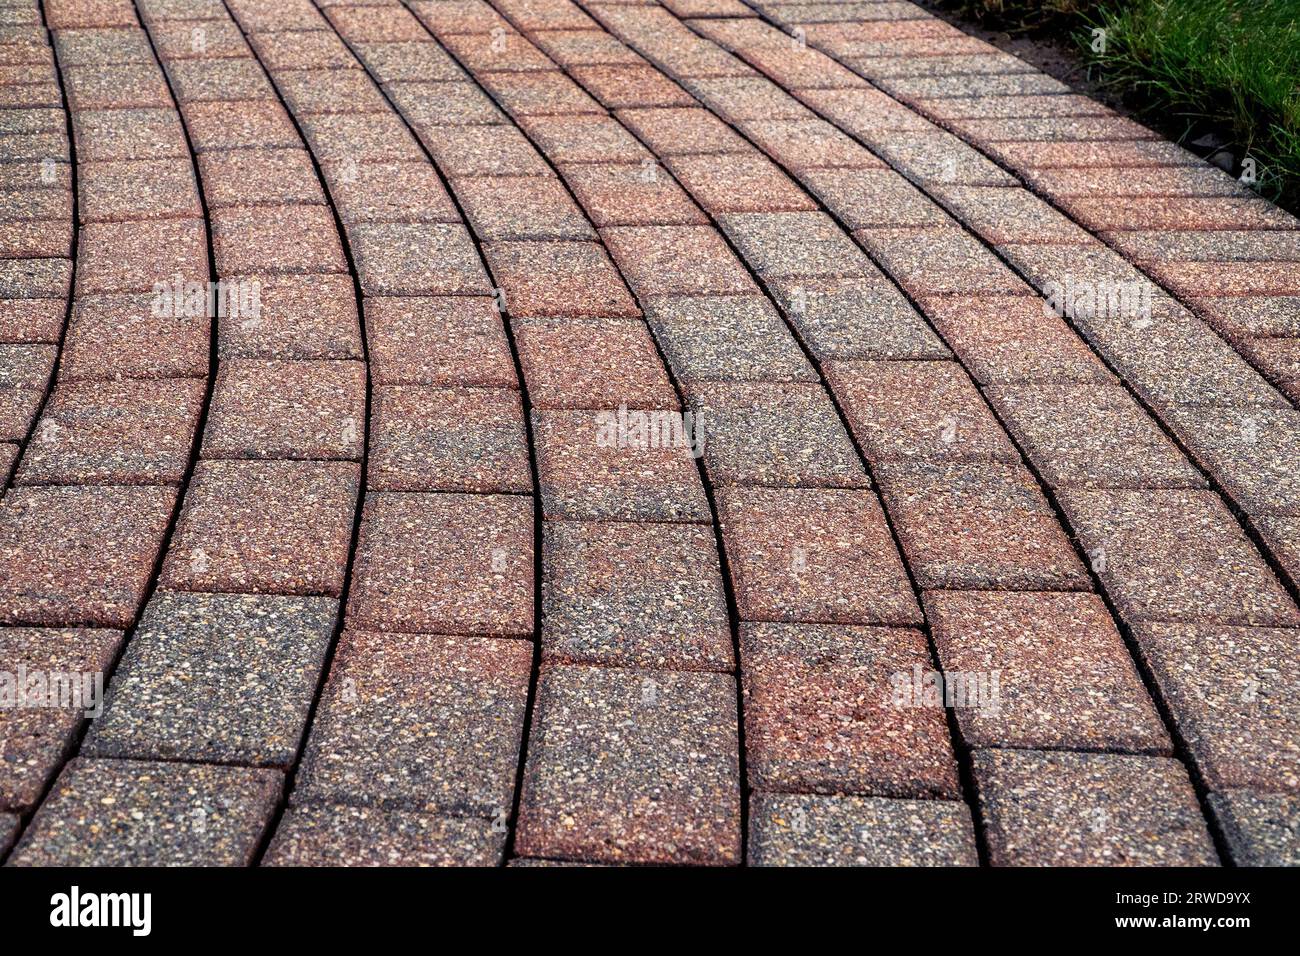 Brick pavers arranged in a curving pattern. Stock Photo